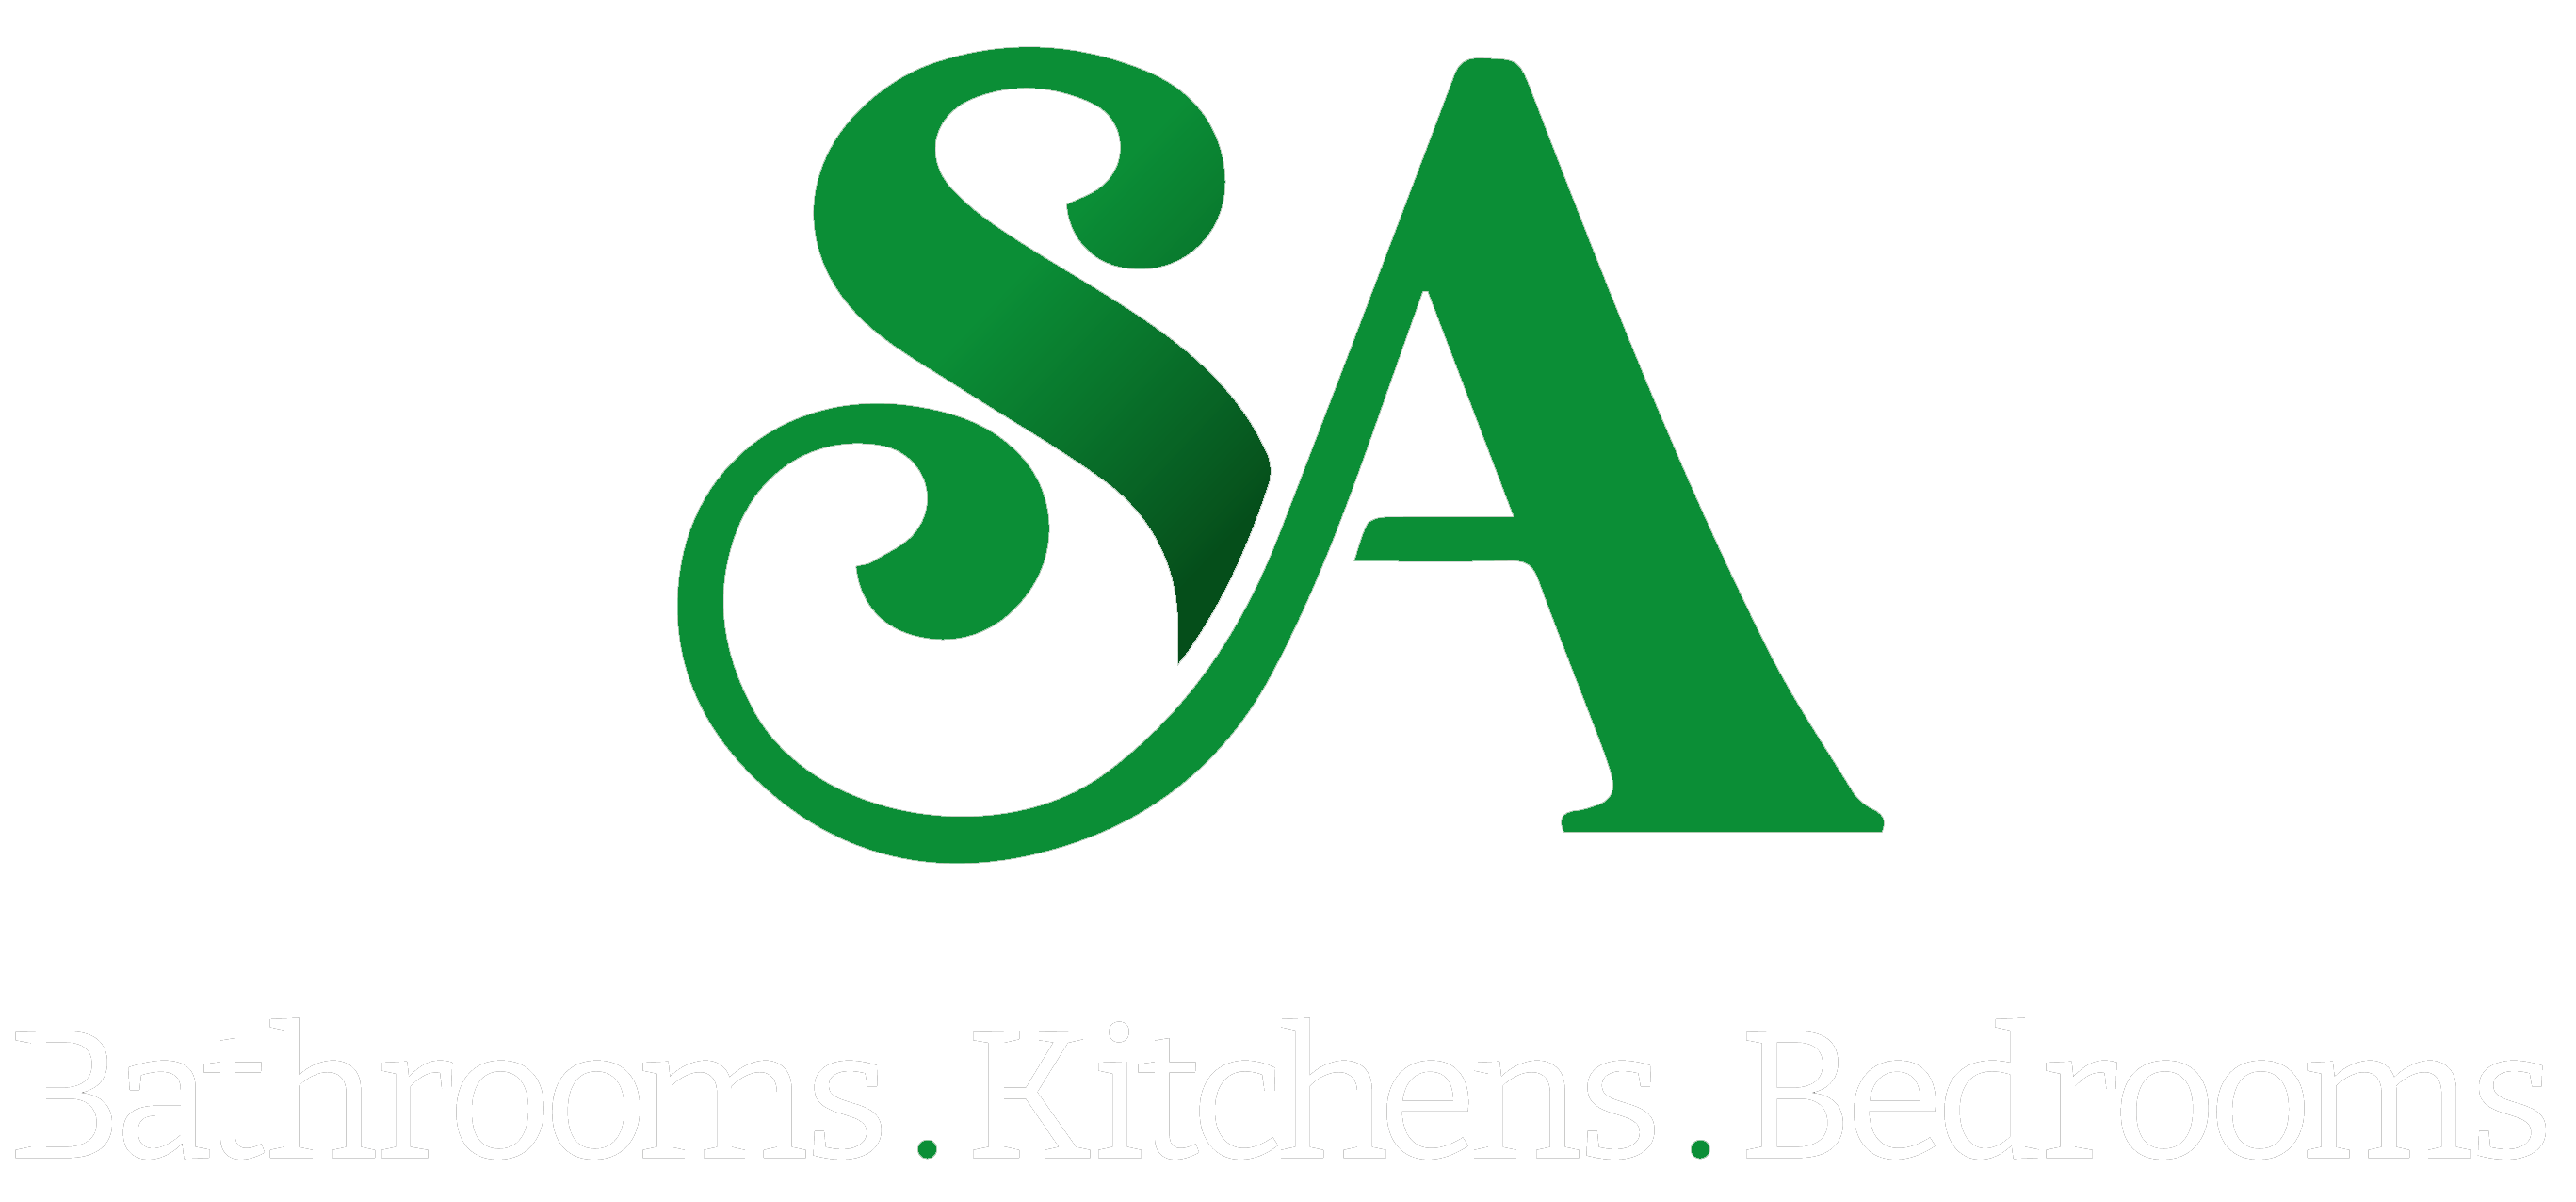 S & A Bathrooms and Kitchens